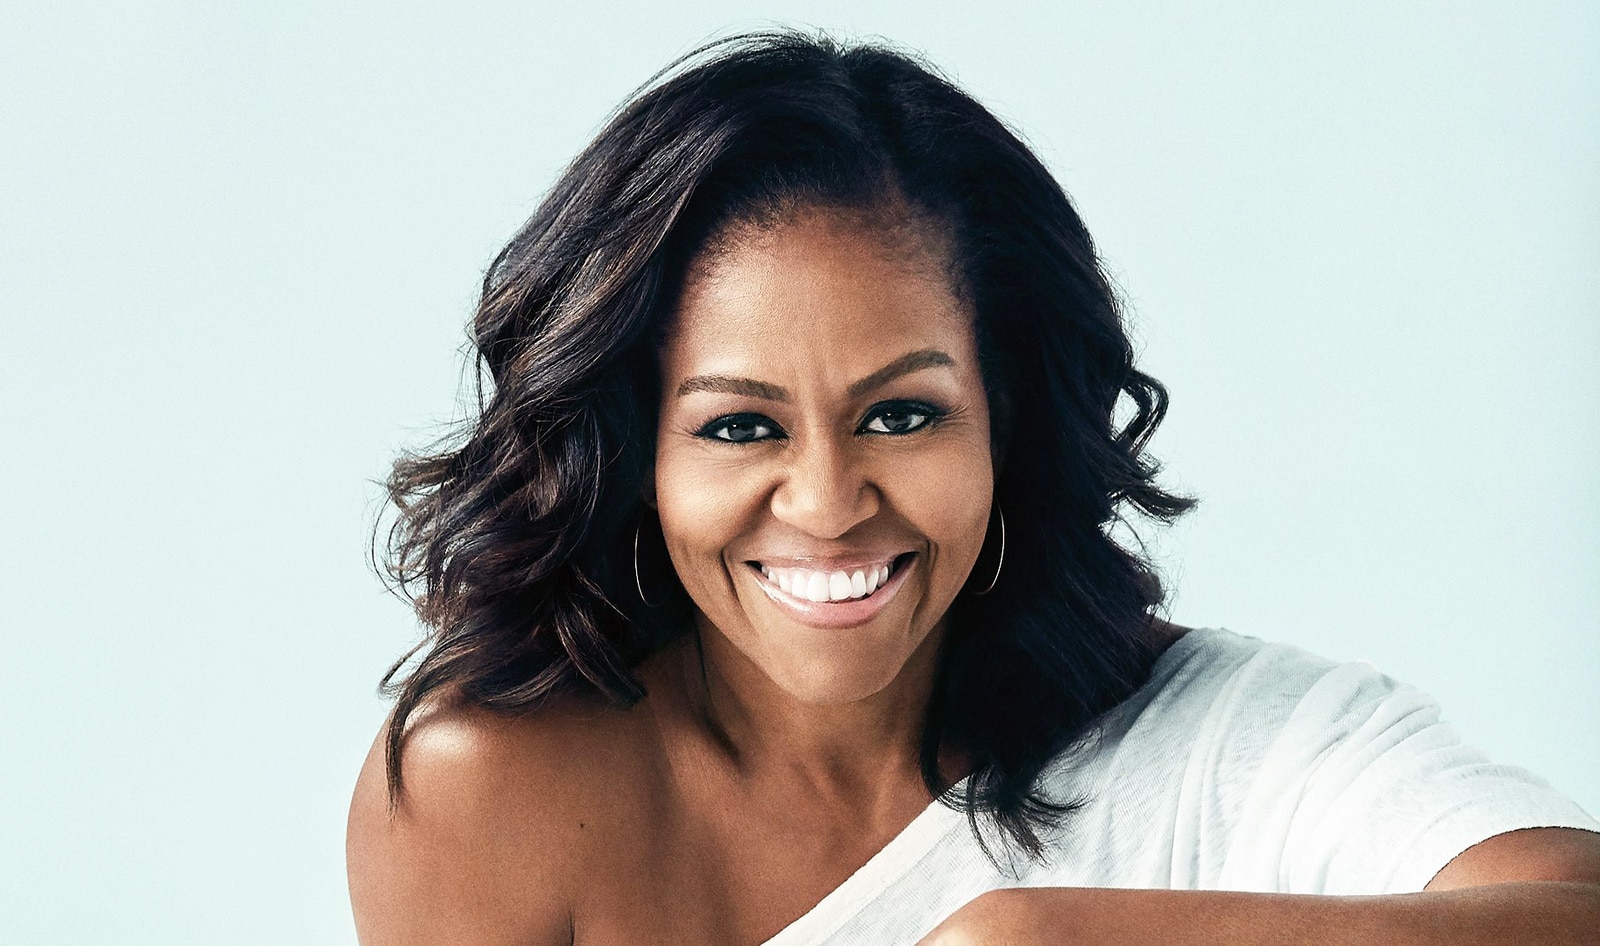 Michelle Obama Partners With Beyond Meat to Build a Healthier America&nbsp;